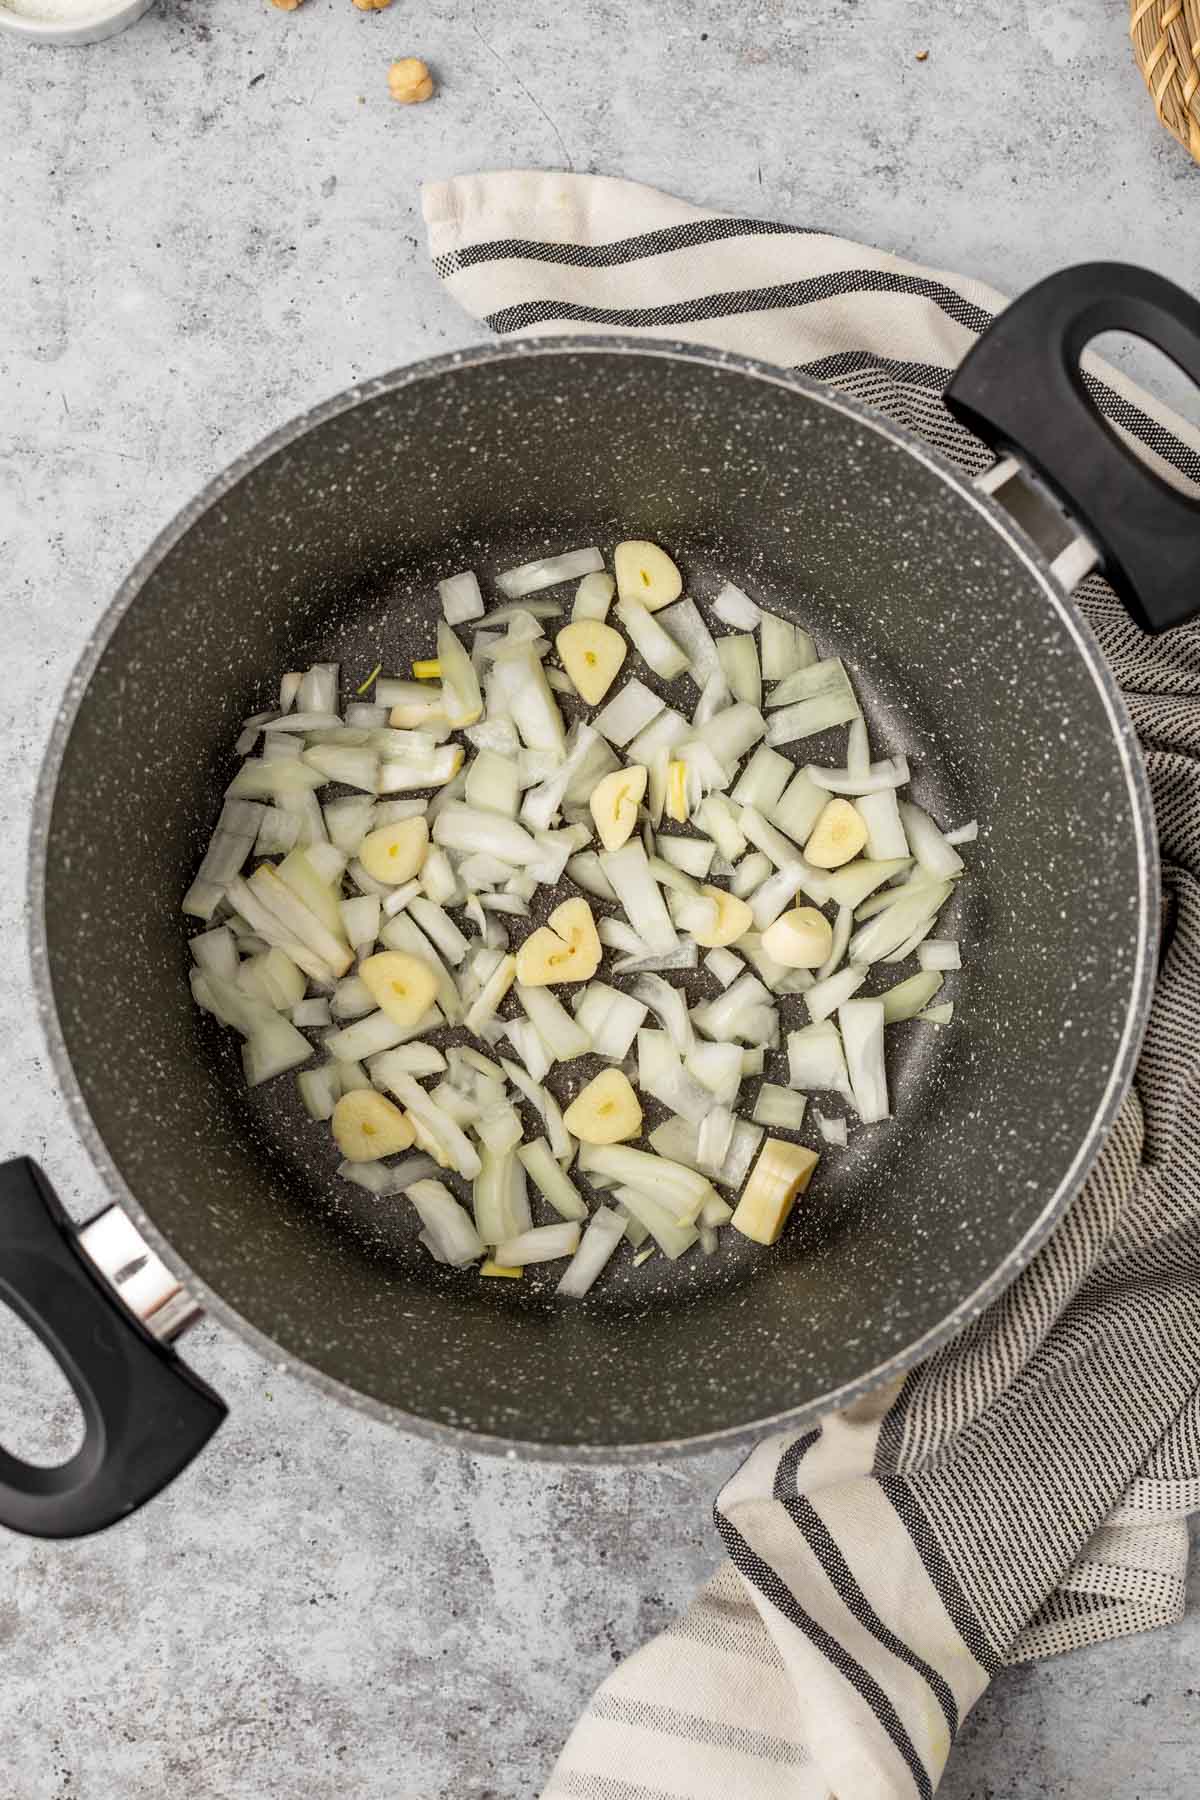 Chopped onion and garlic in a large pot.